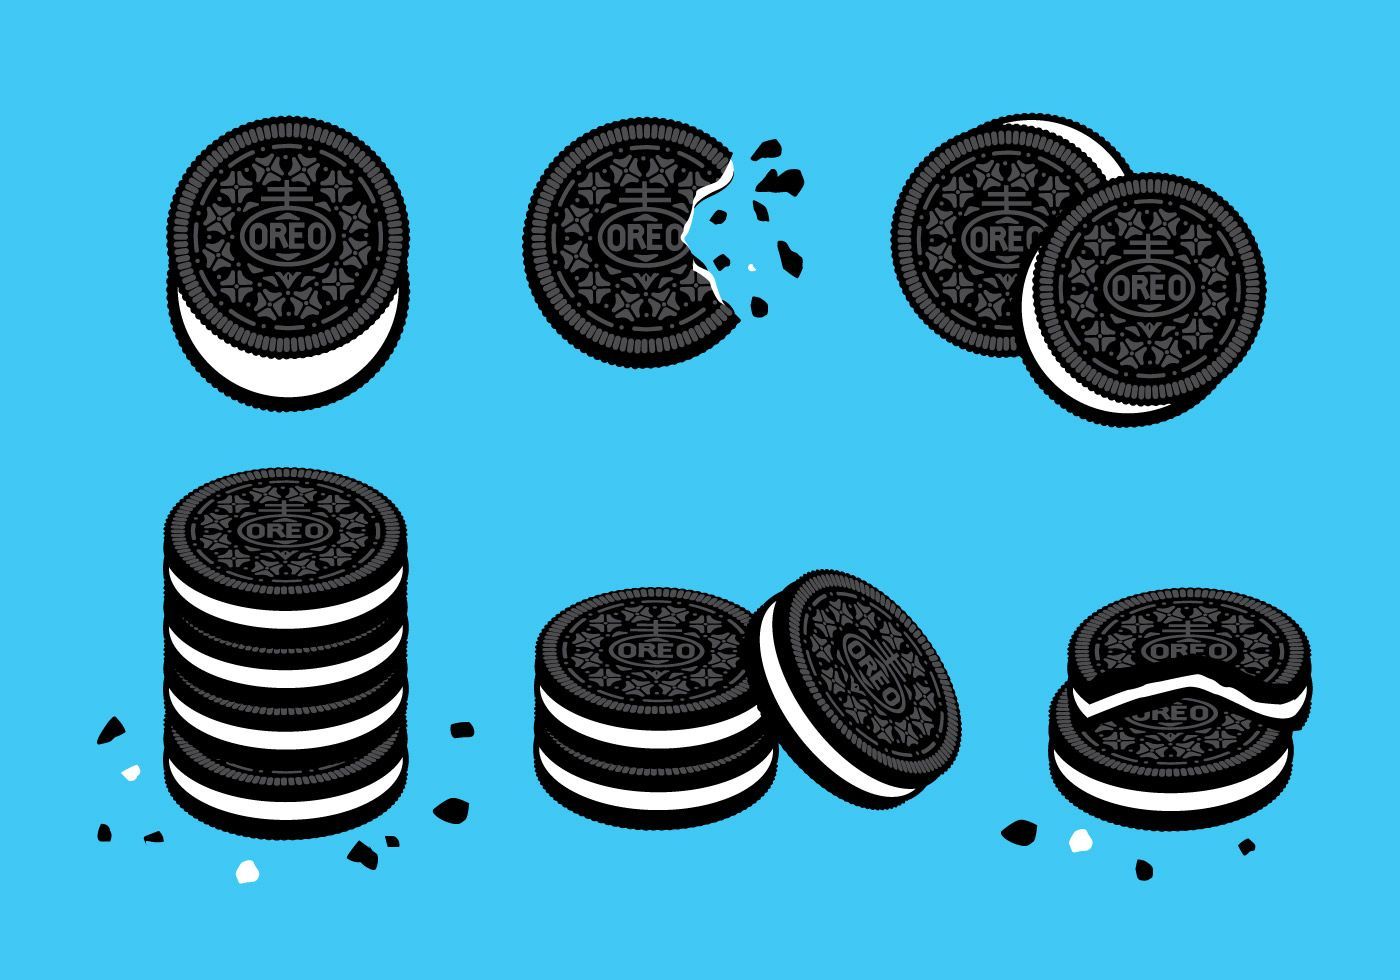 An illustration of a stack of Oreo cookies on a blue background - Oreo